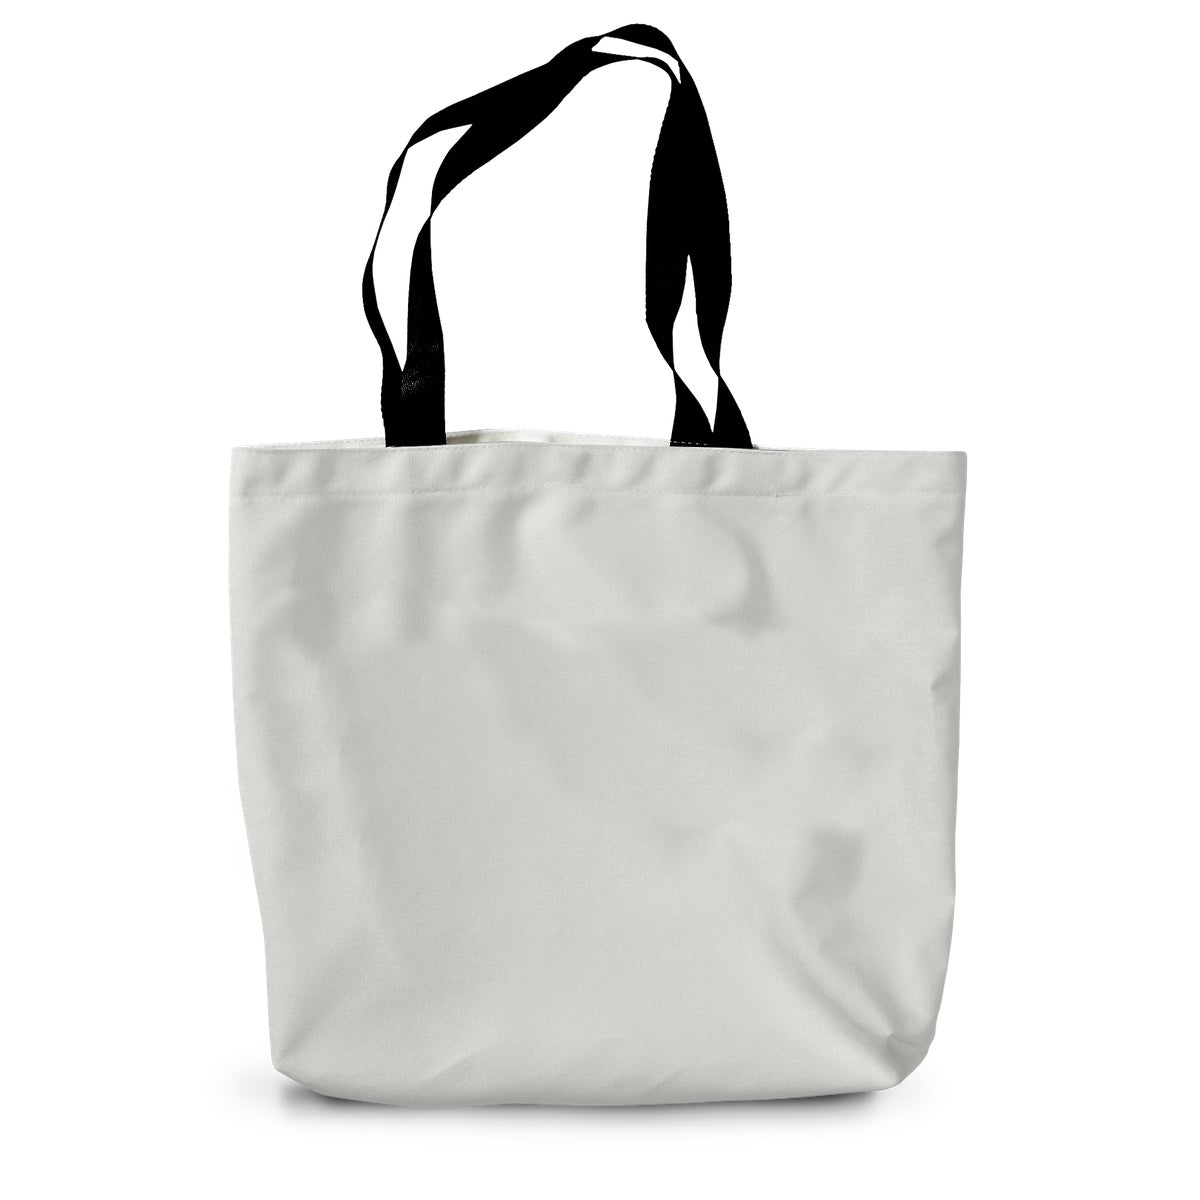 Seagulls At Feeding Time By David Sawyer Canvas Tote Bag